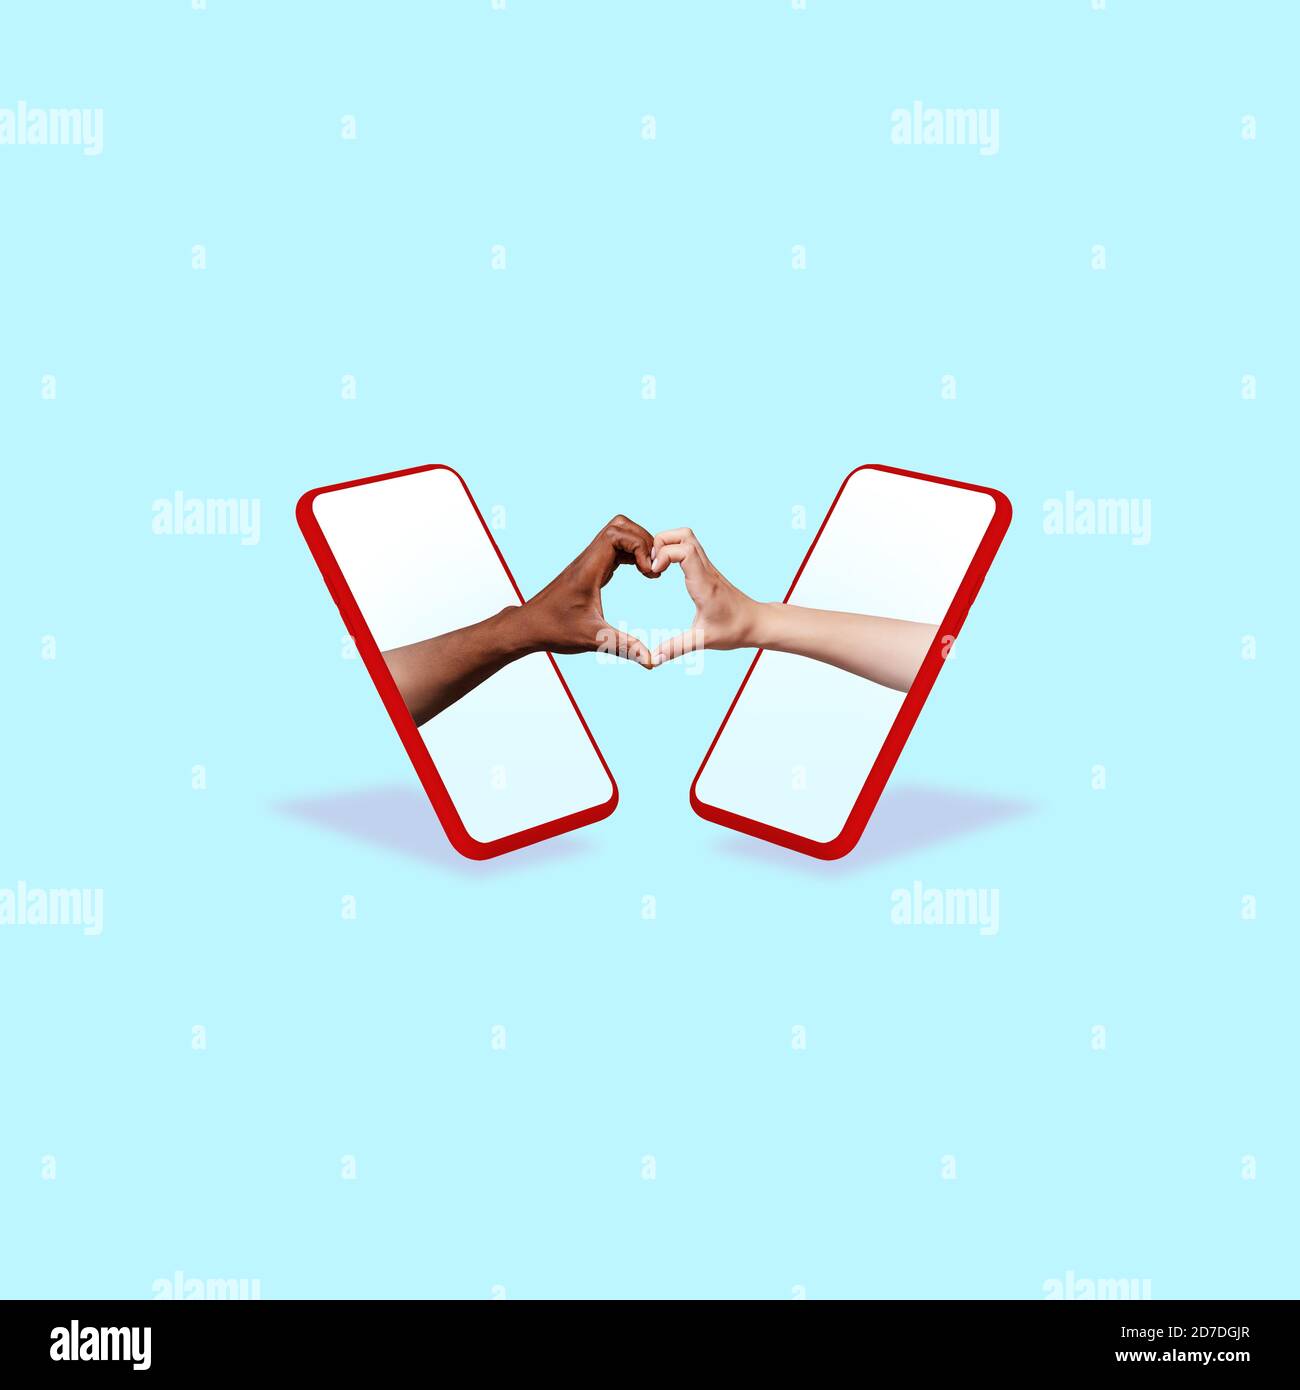 Heart. Hands gesturing through screens of mobile phones against blue background. Concept of social distance during coronavirus epidemic, online meetings, insulation, remote working and communication. Stock Photo